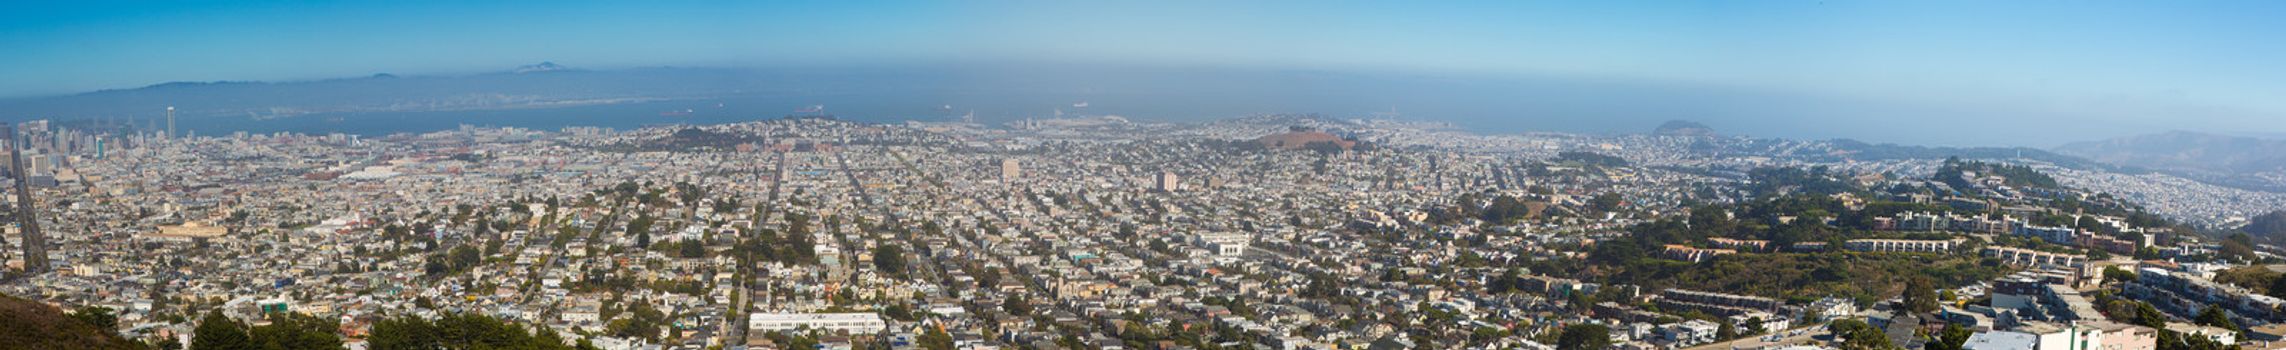 San Francisco, panoramic view of the entire city